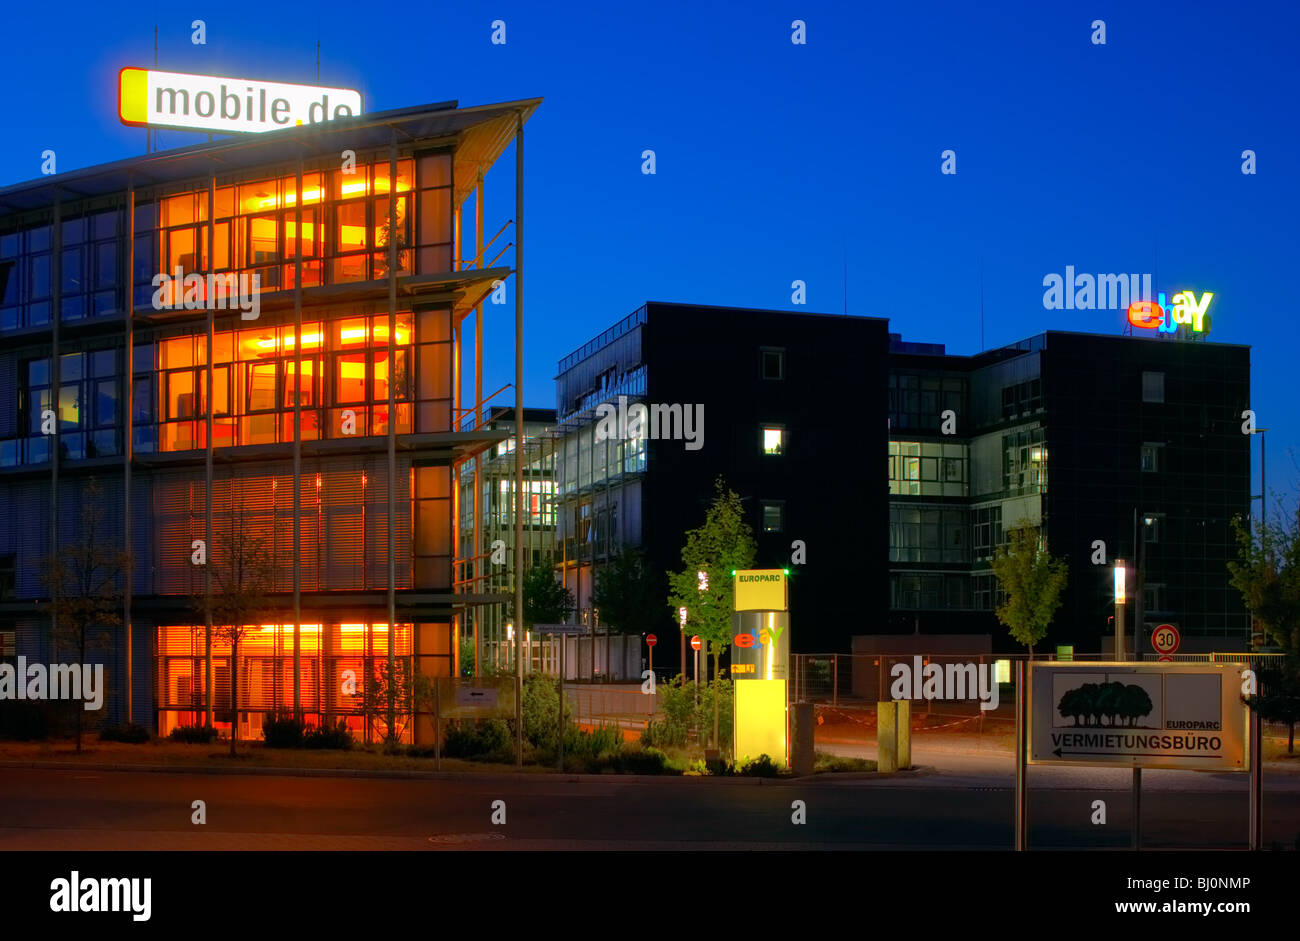 Office buildings of eBay and mobile.de in the evening, Kleinmachnow, Germany Stock Photo